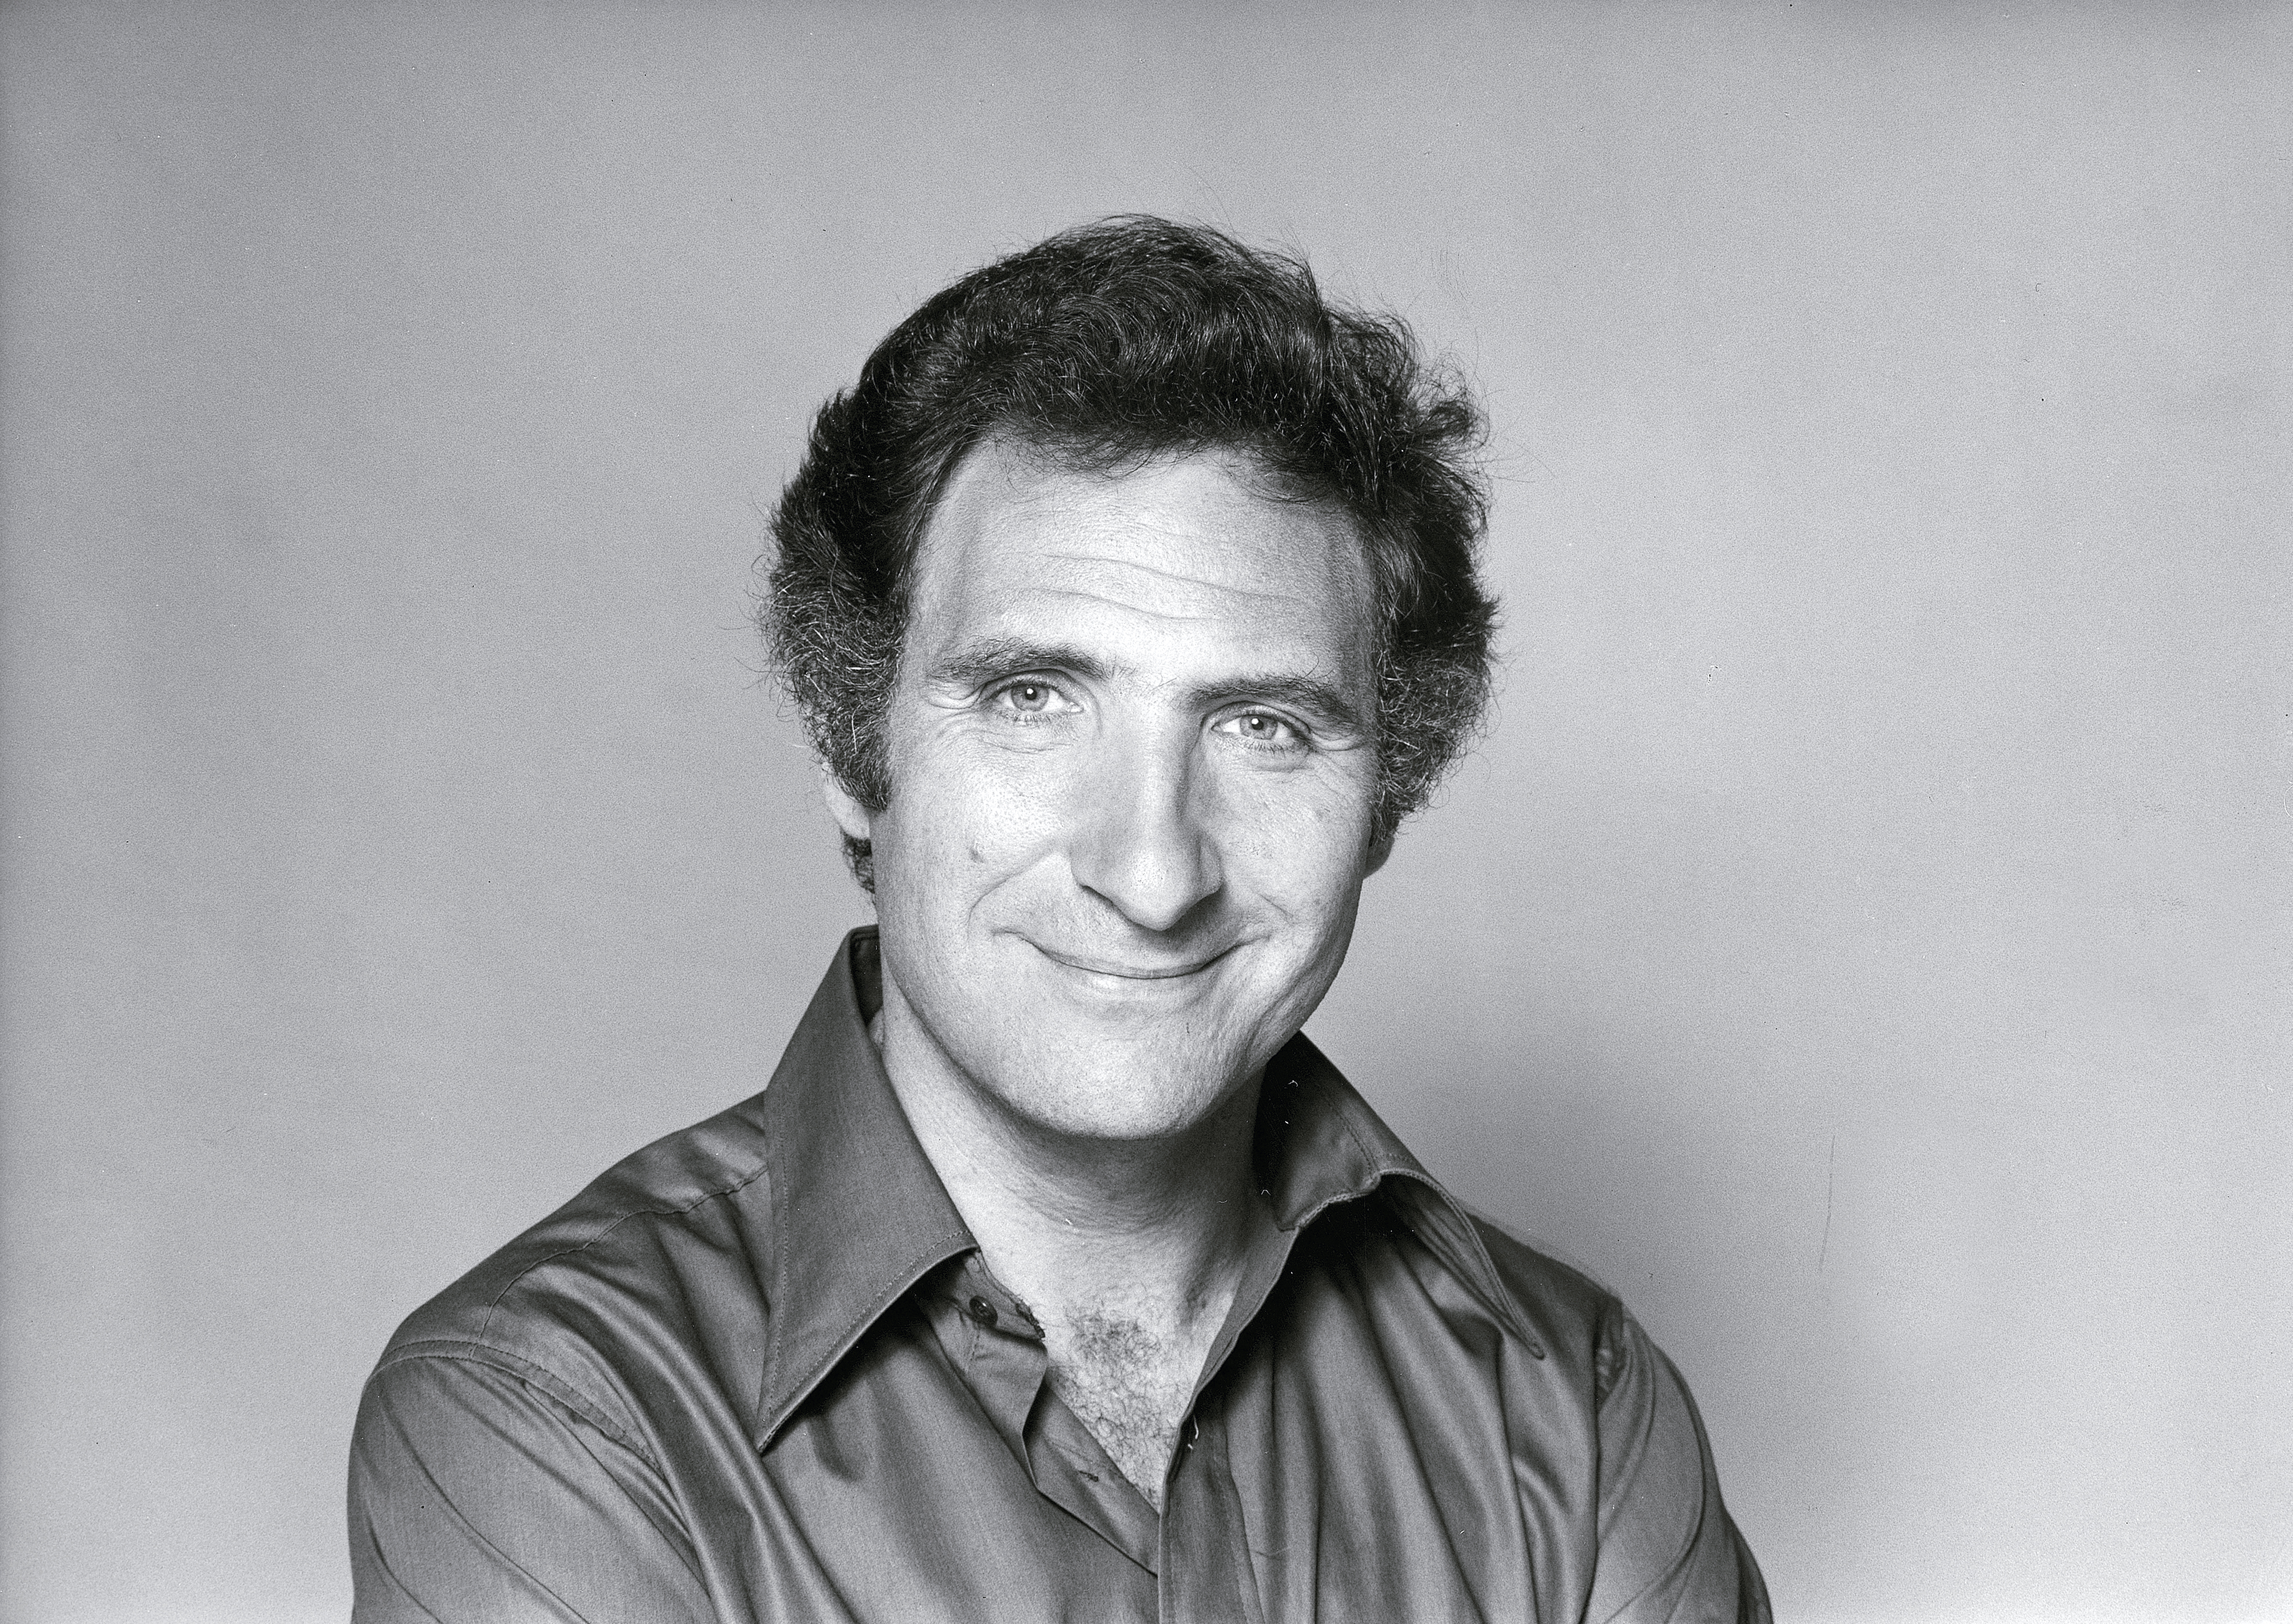 Judd Hirsch on "Taxi" Season One in 1978 | Source: Getty Images